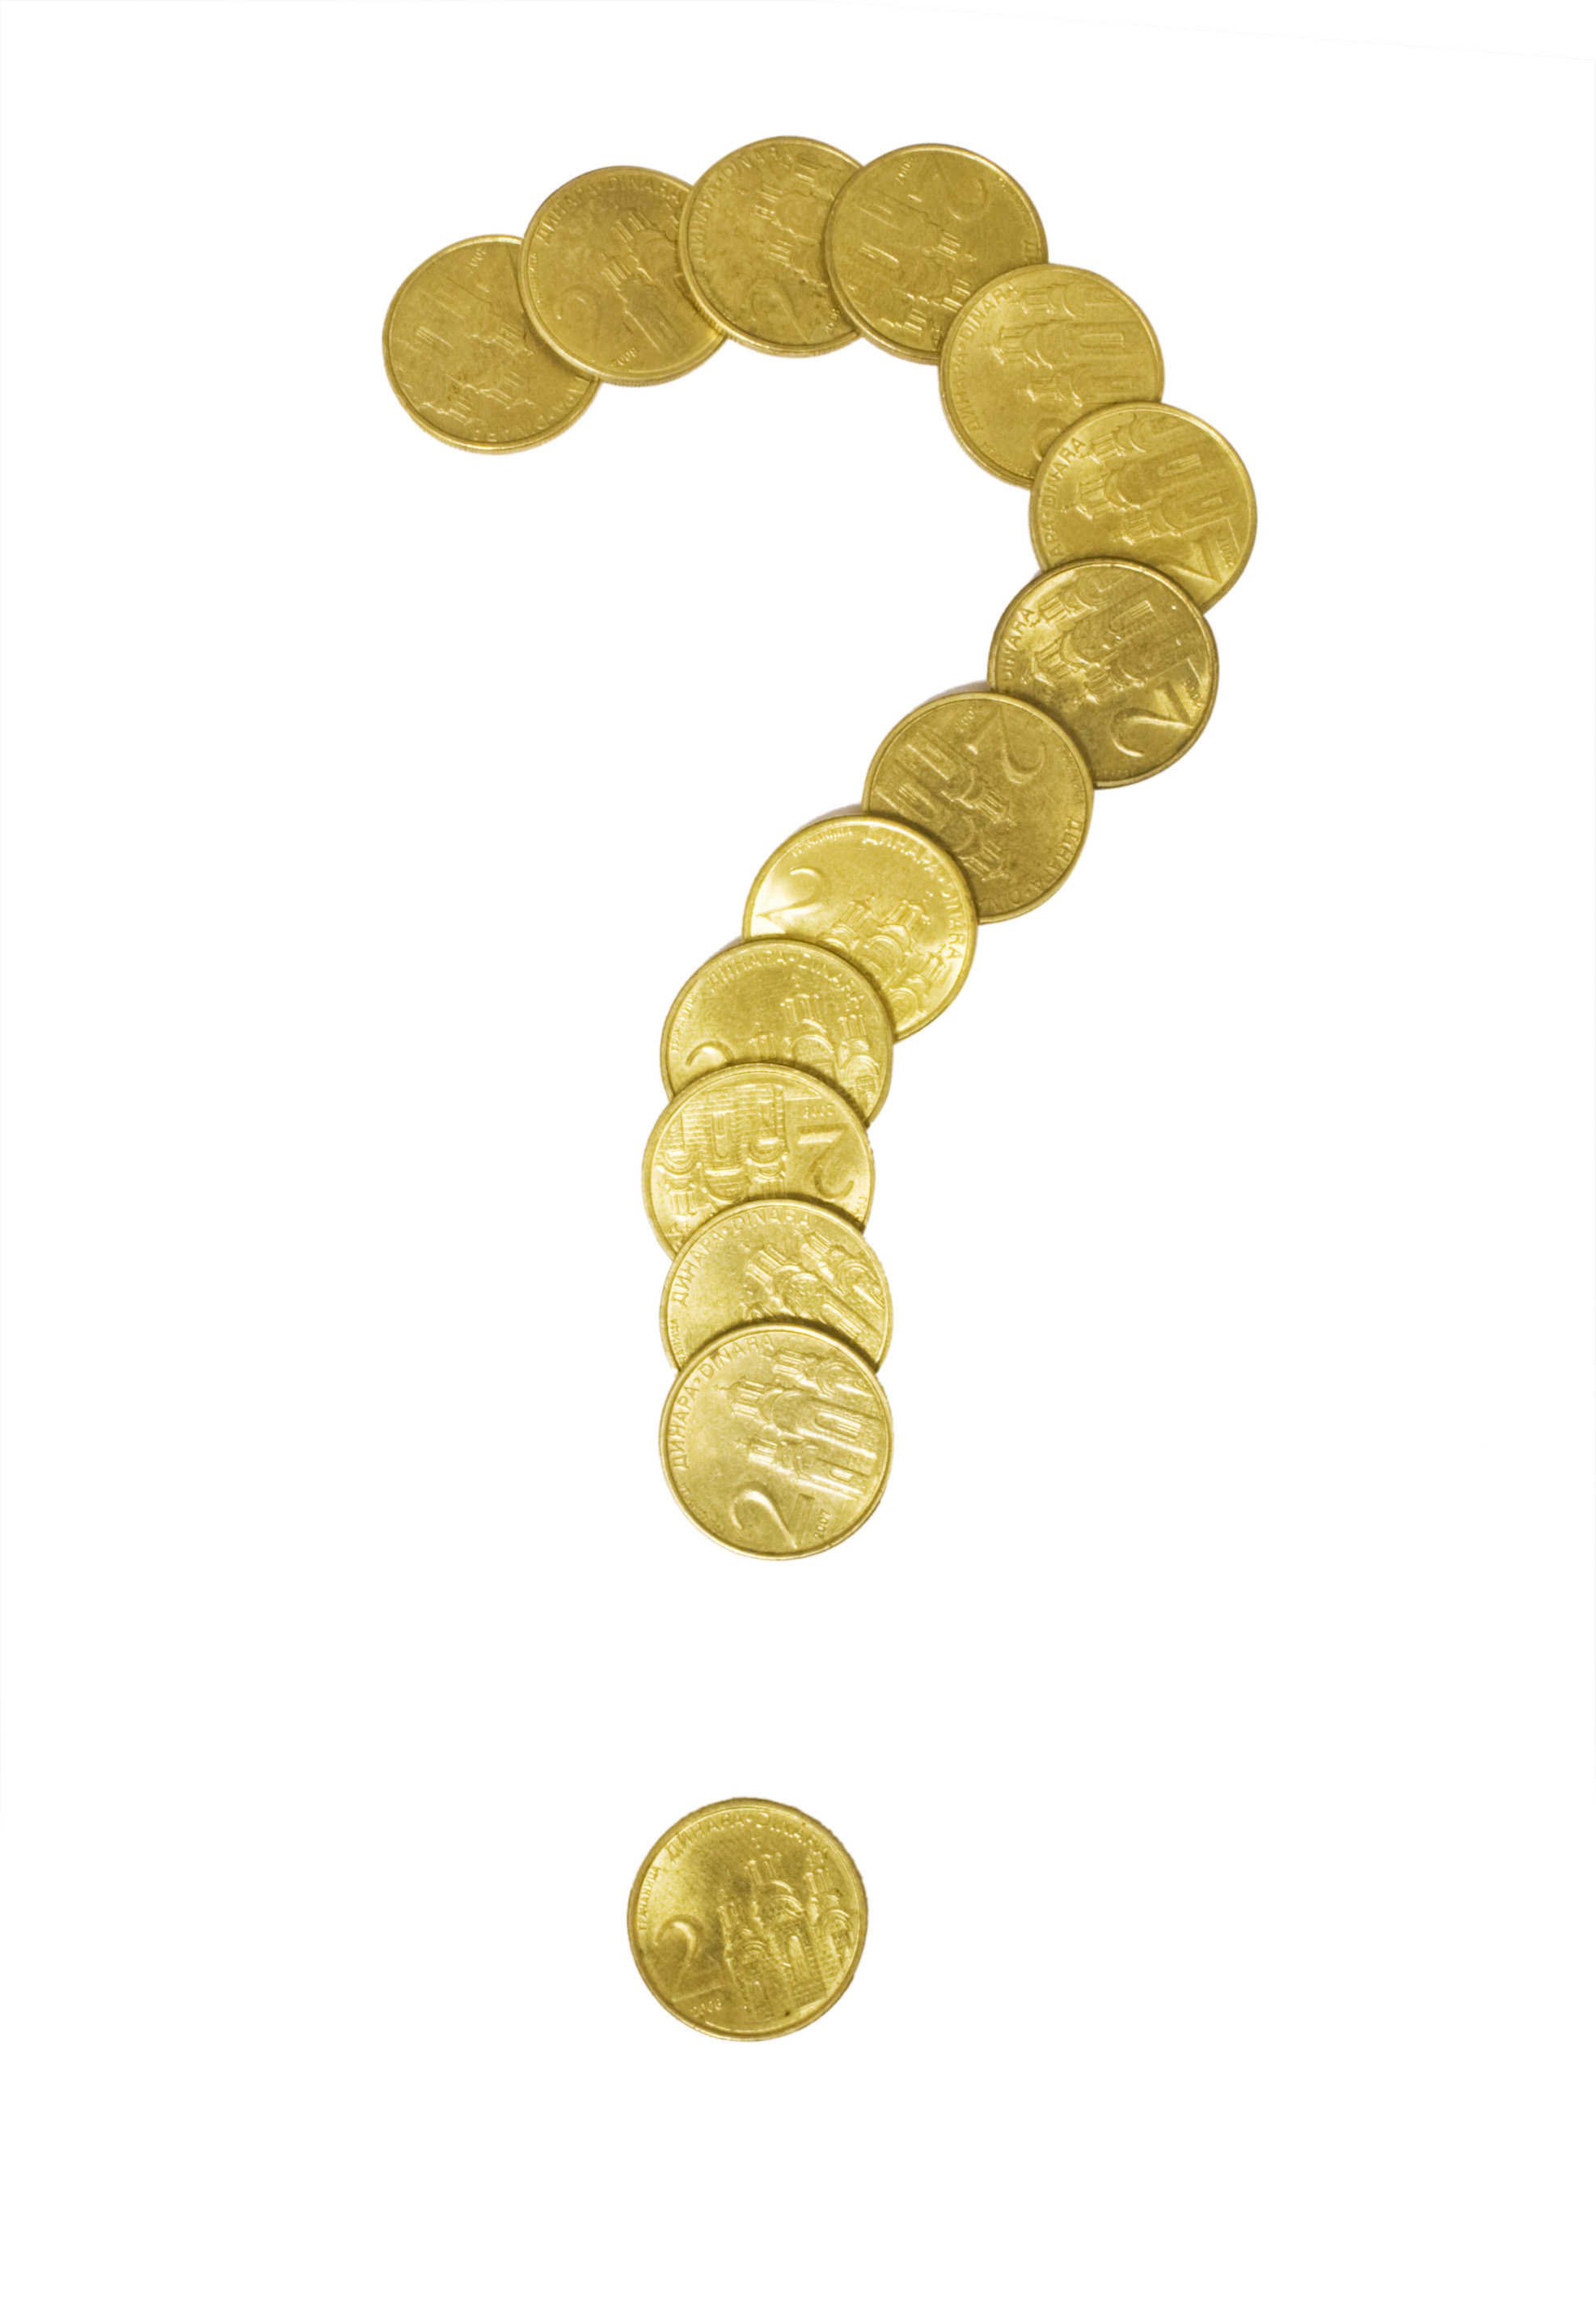 gold-coin-question-sign